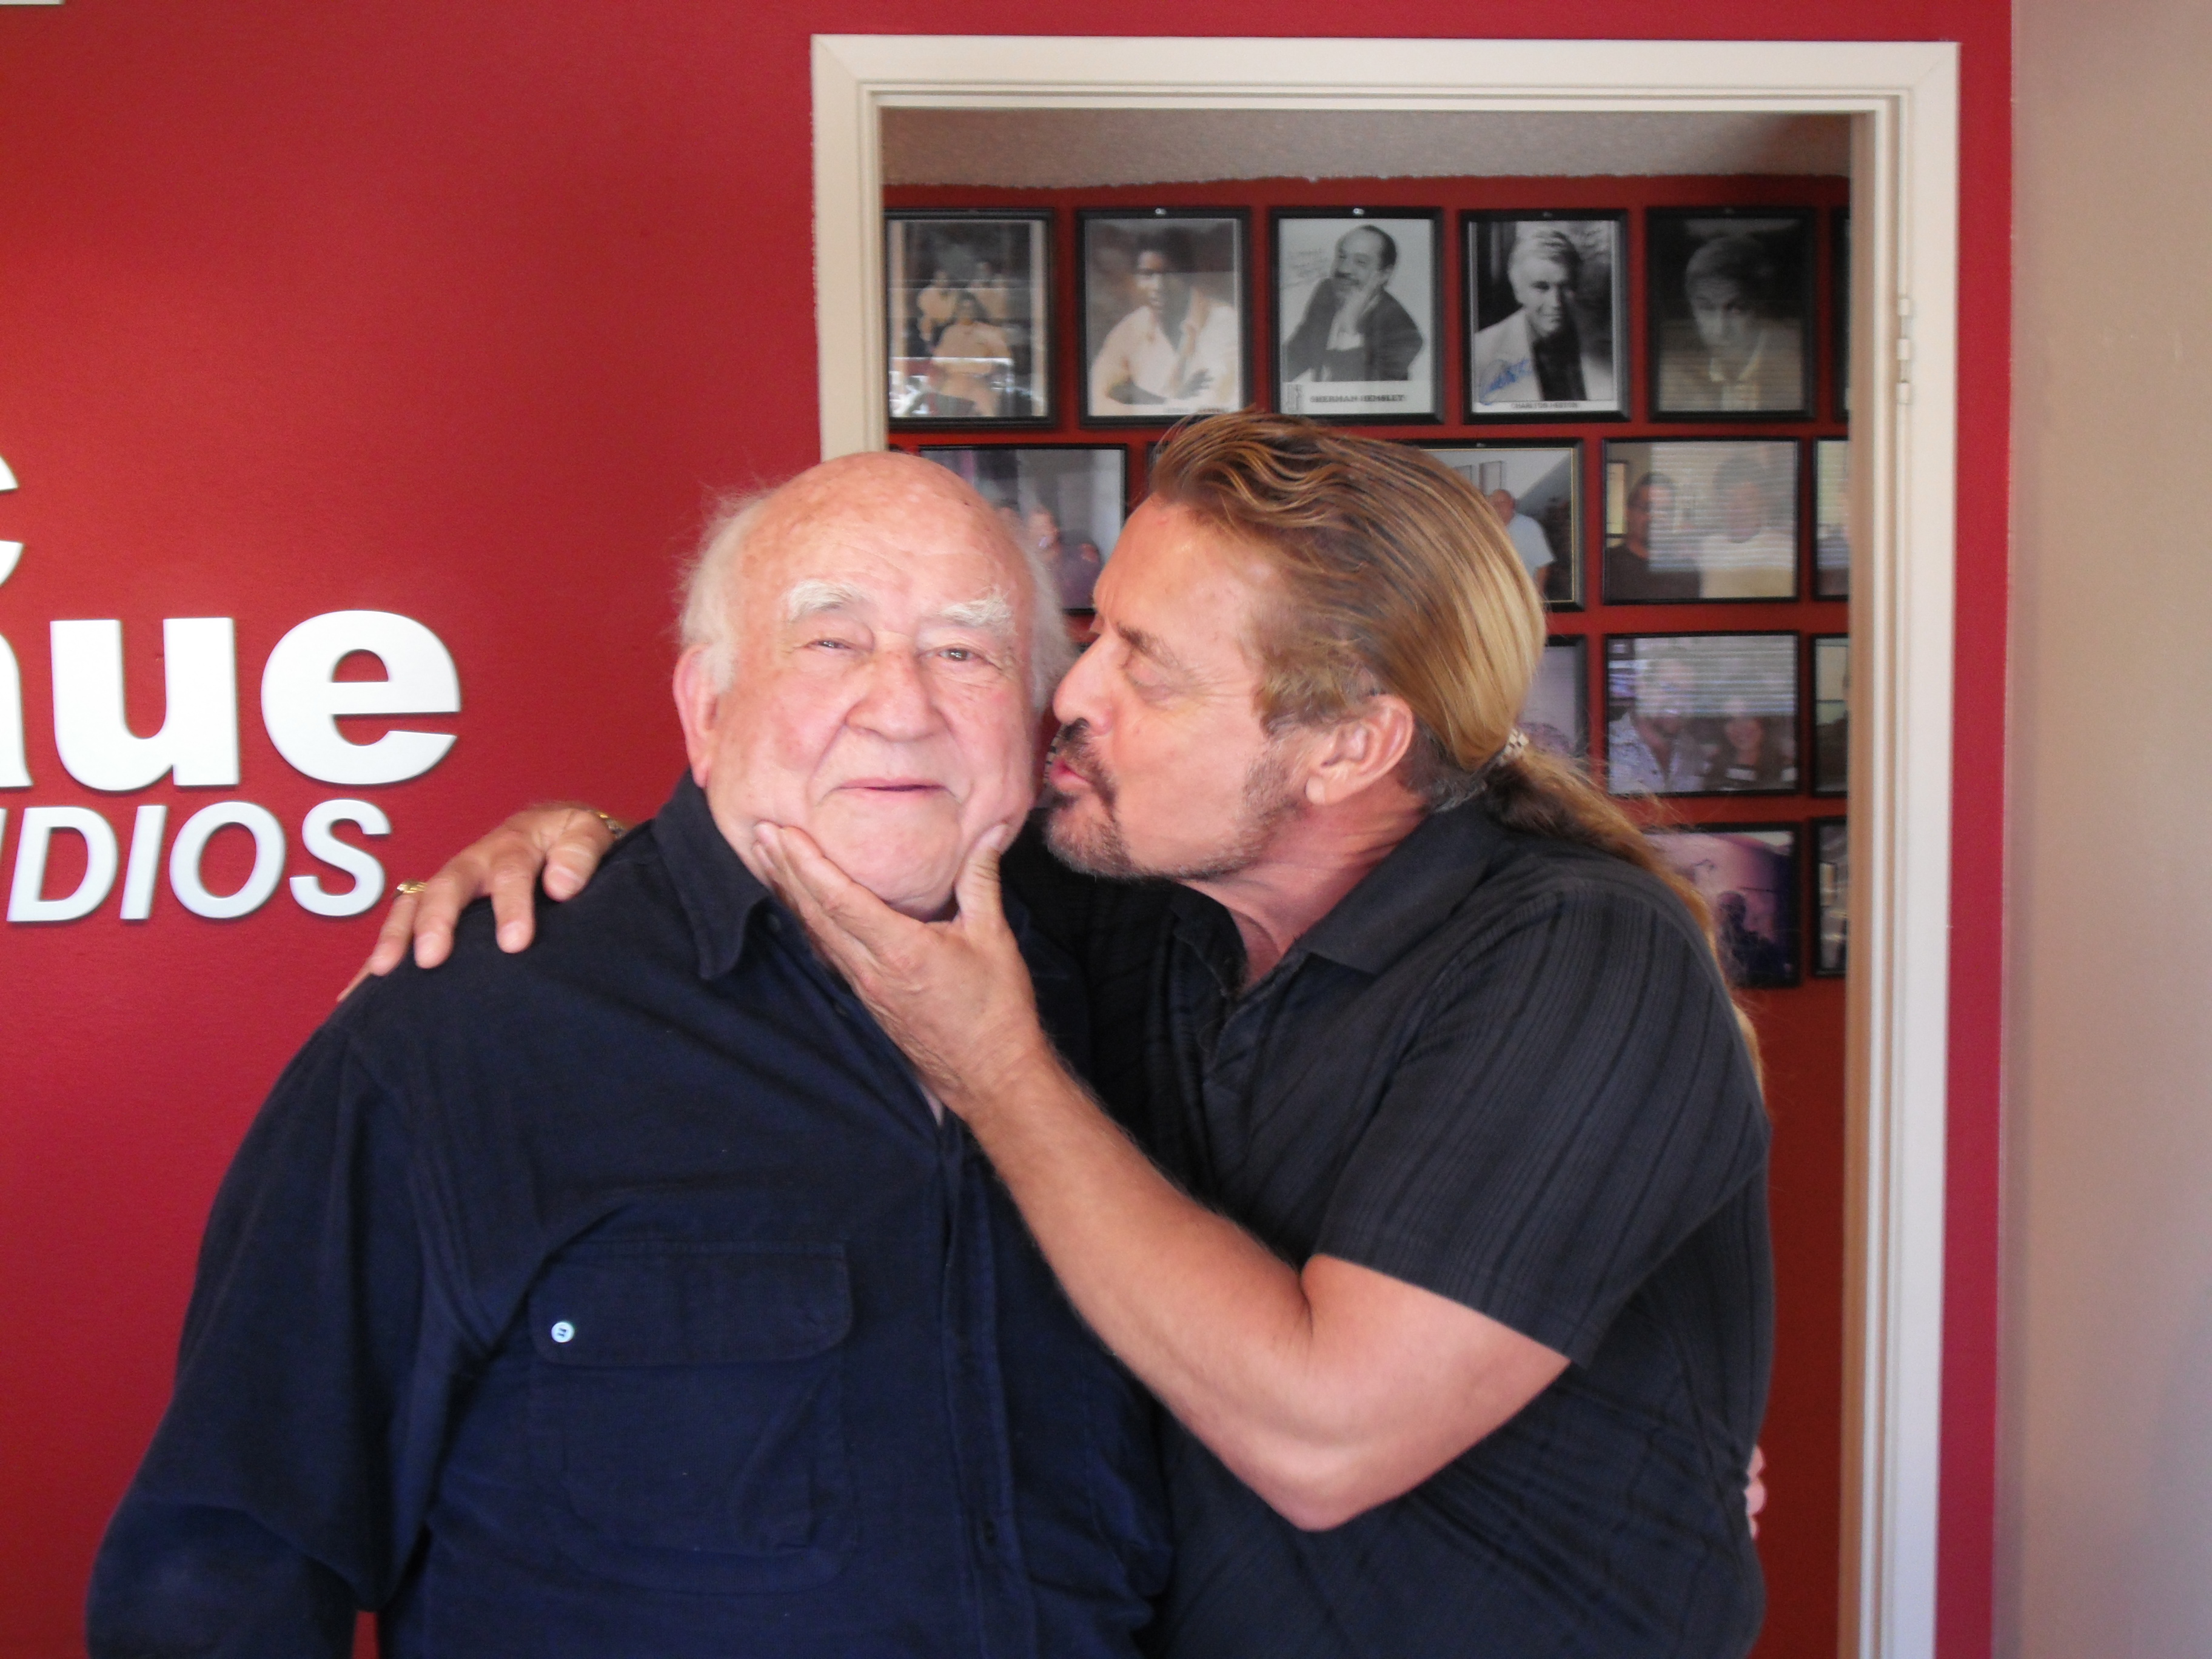 Old pal Ed Asner (Up) lending his voice to another project at our Burbank voice over studios.